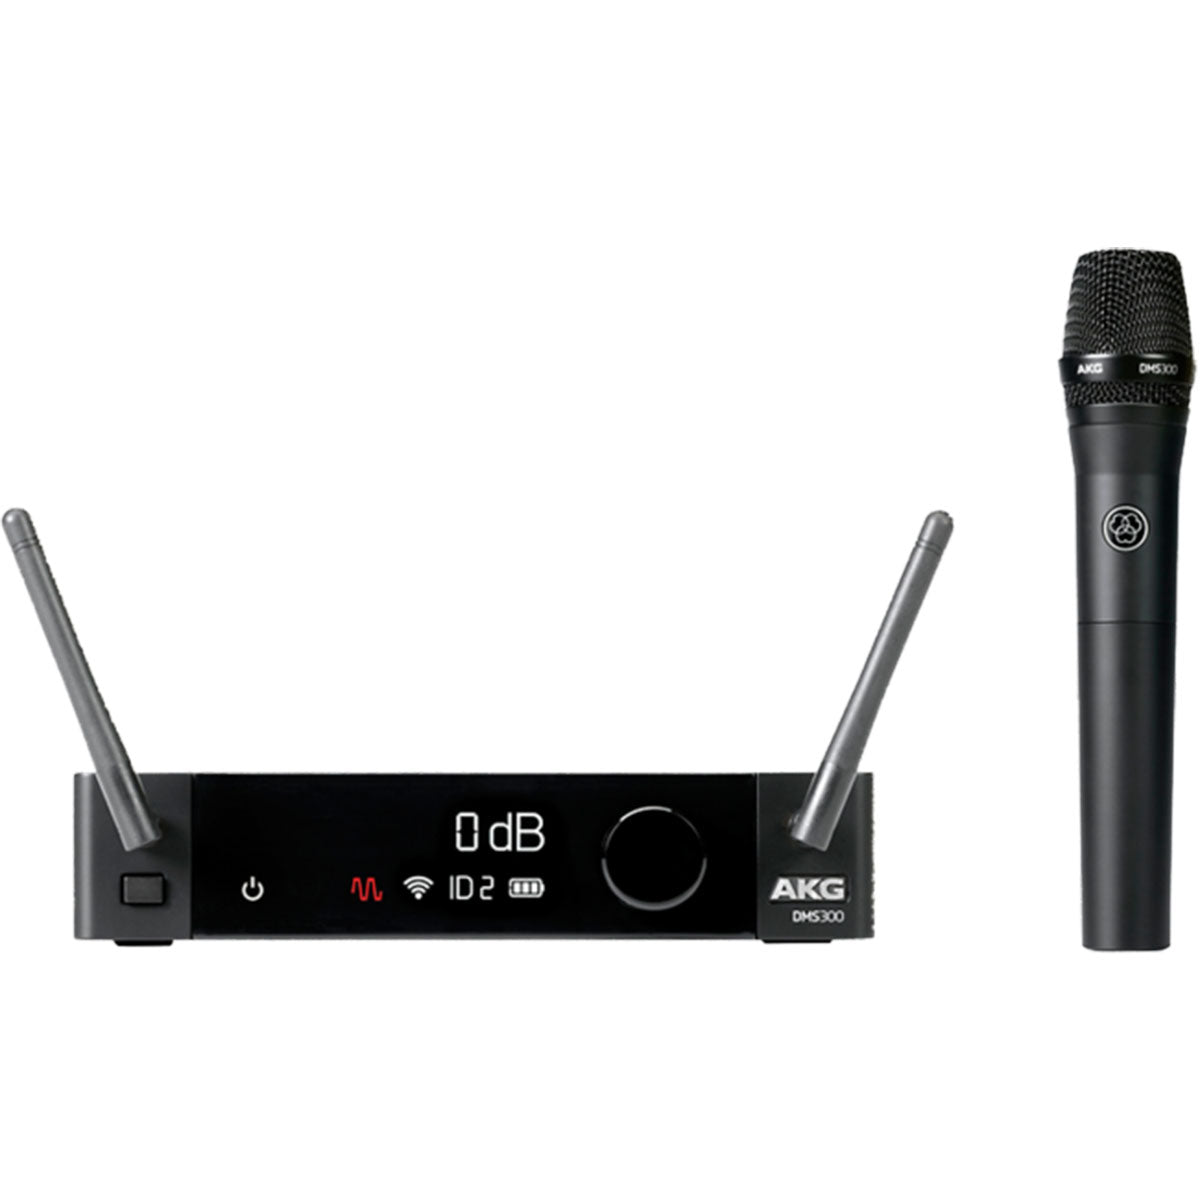 AKG DMS 300 Wireless Microphone Vocal Handheld Mic 2.4GHZ System